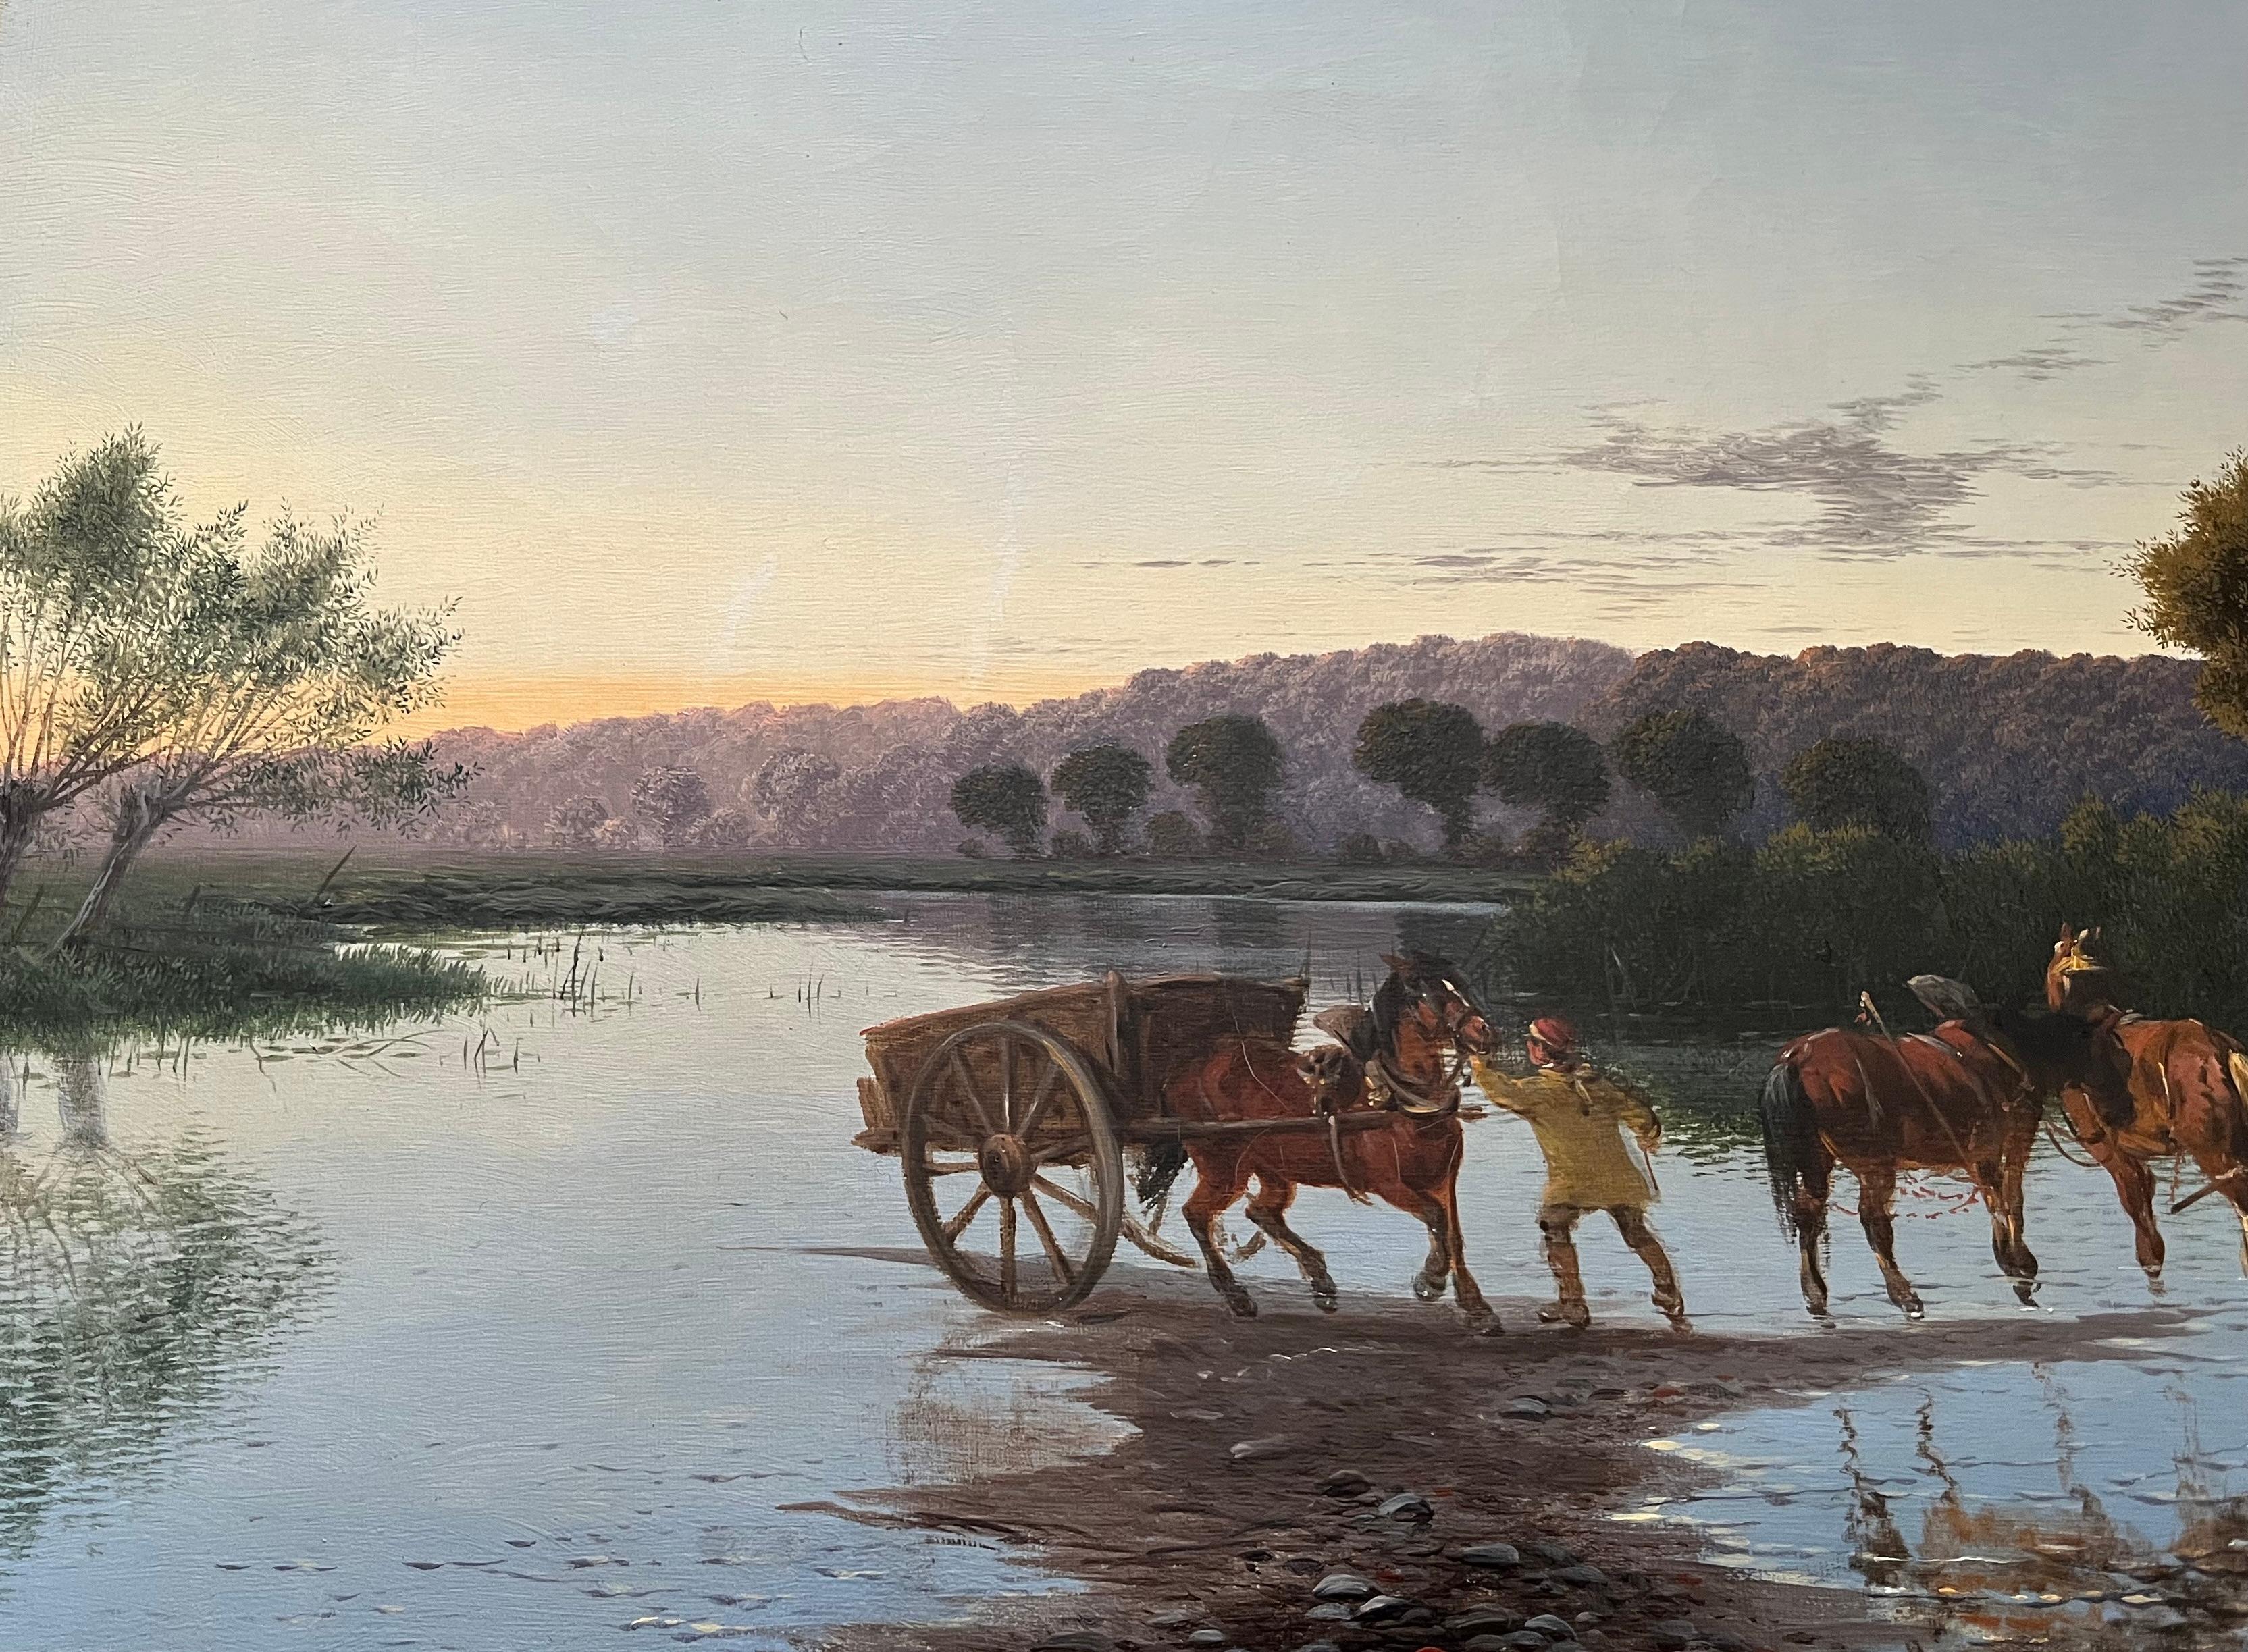  A very atmospheric scene of a horse and cart crossing the river Wey (a tributary of the river Thames) under a beautiful twilight sky. There is wonderful detail and light with the artist's characteristic use of delicate brushwork to depict the